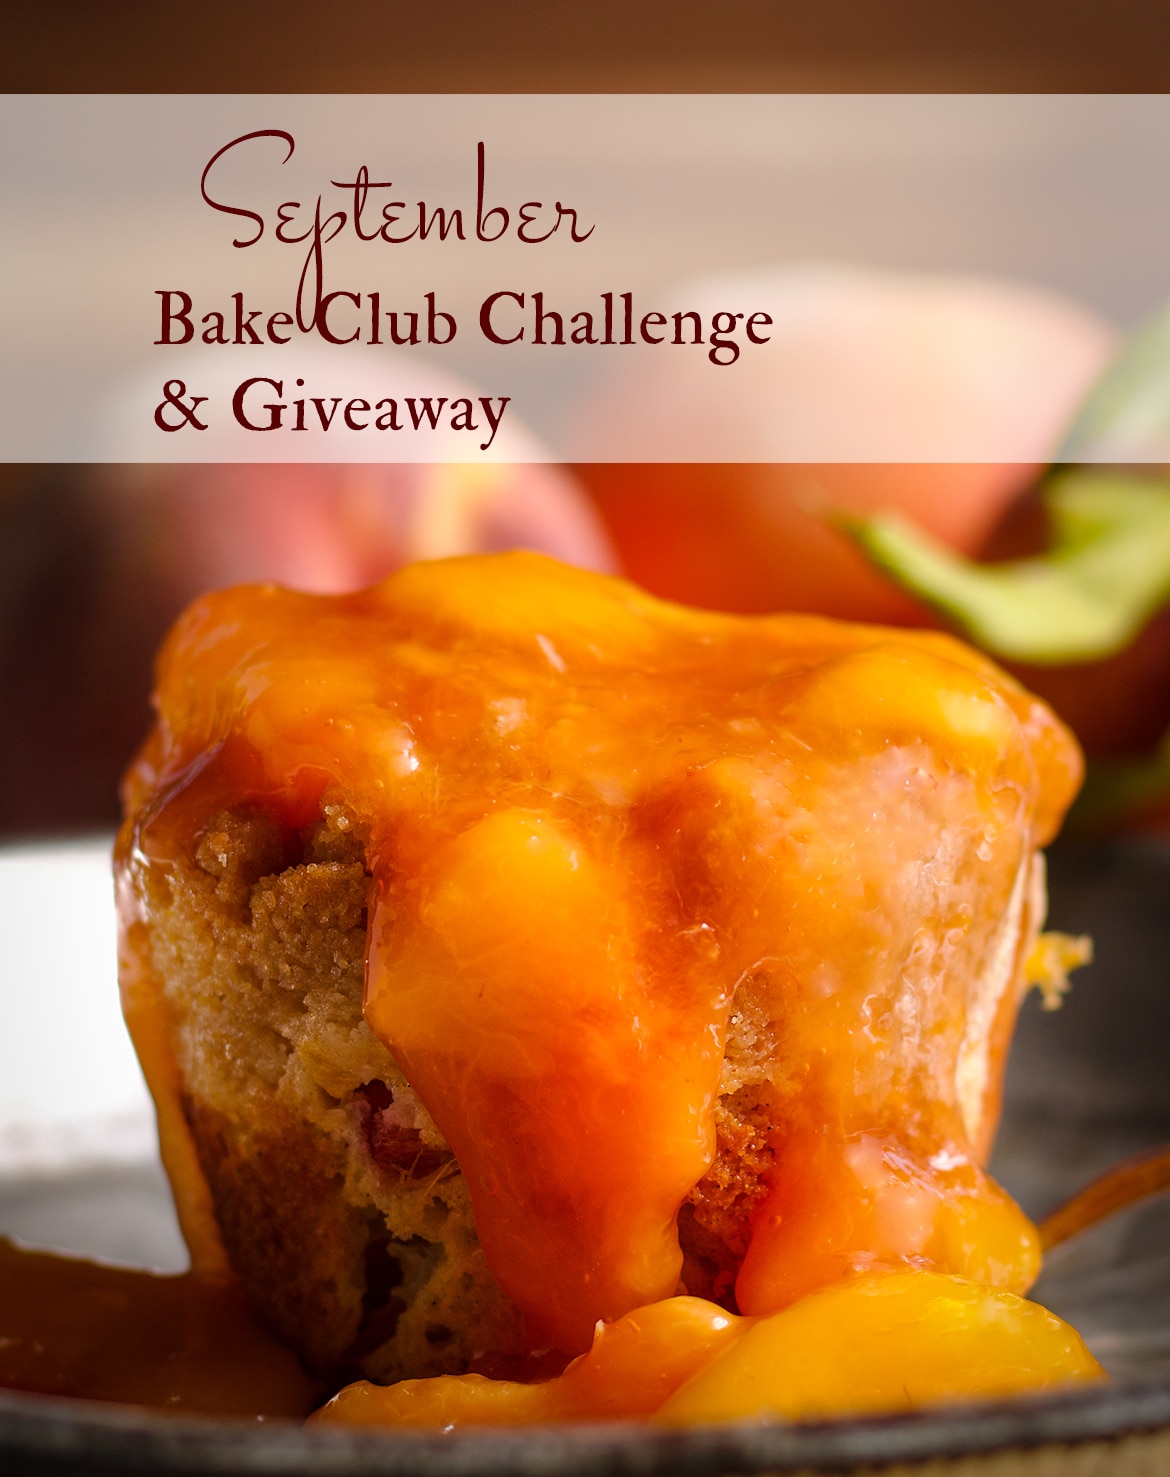 The September Bake Club Challenge recipe is Peach Cobbler Muffins